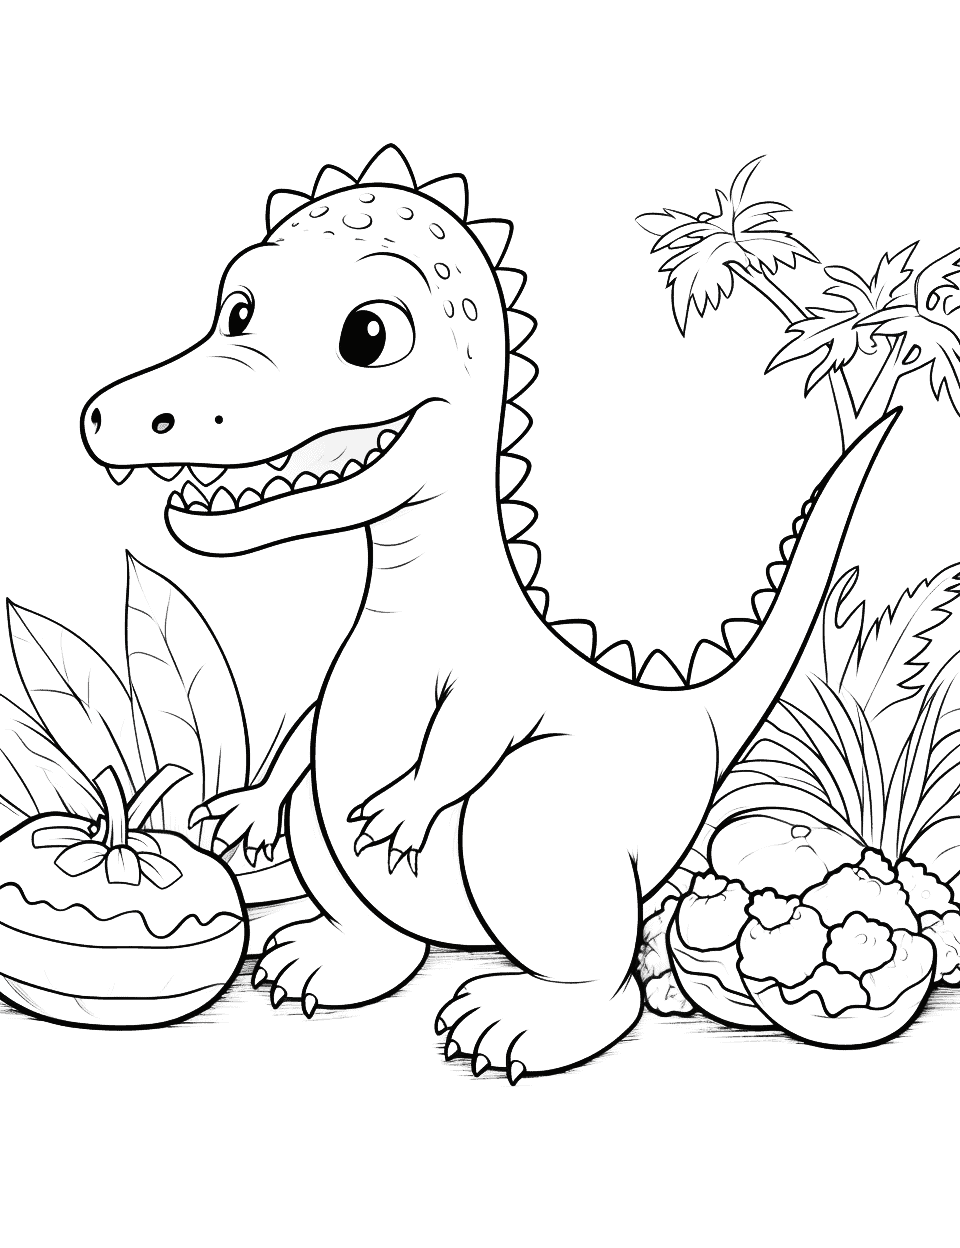 Cute Dino Picnic Coloring Page - Cute dinosaur having a picnic, complete with prehistoric fruits.